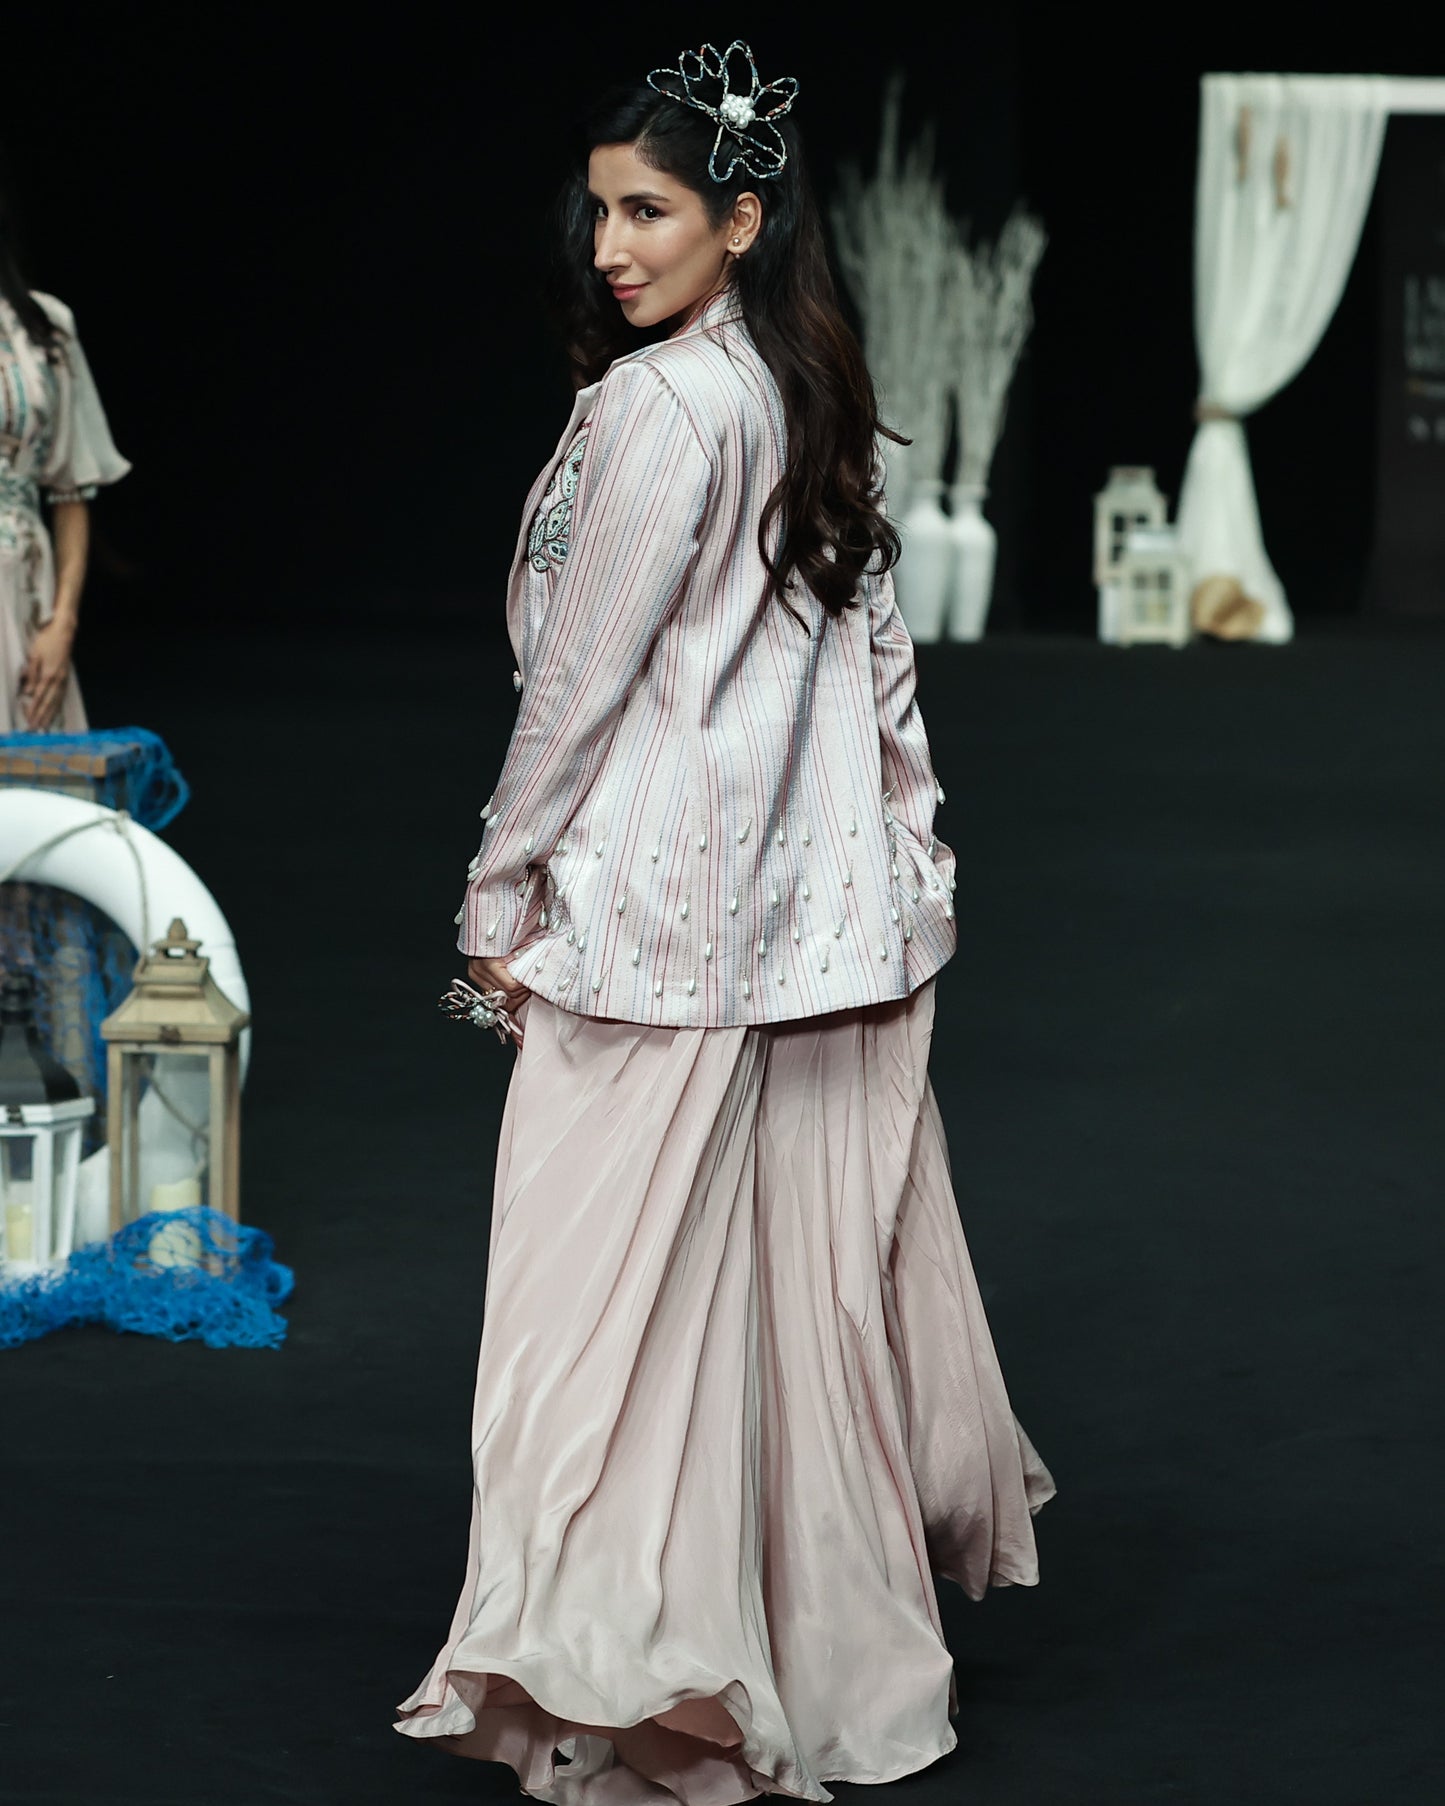 Parul Gulati in Peachy Pink Bralette and flare pants with embellished ajrakh patchworked jacket